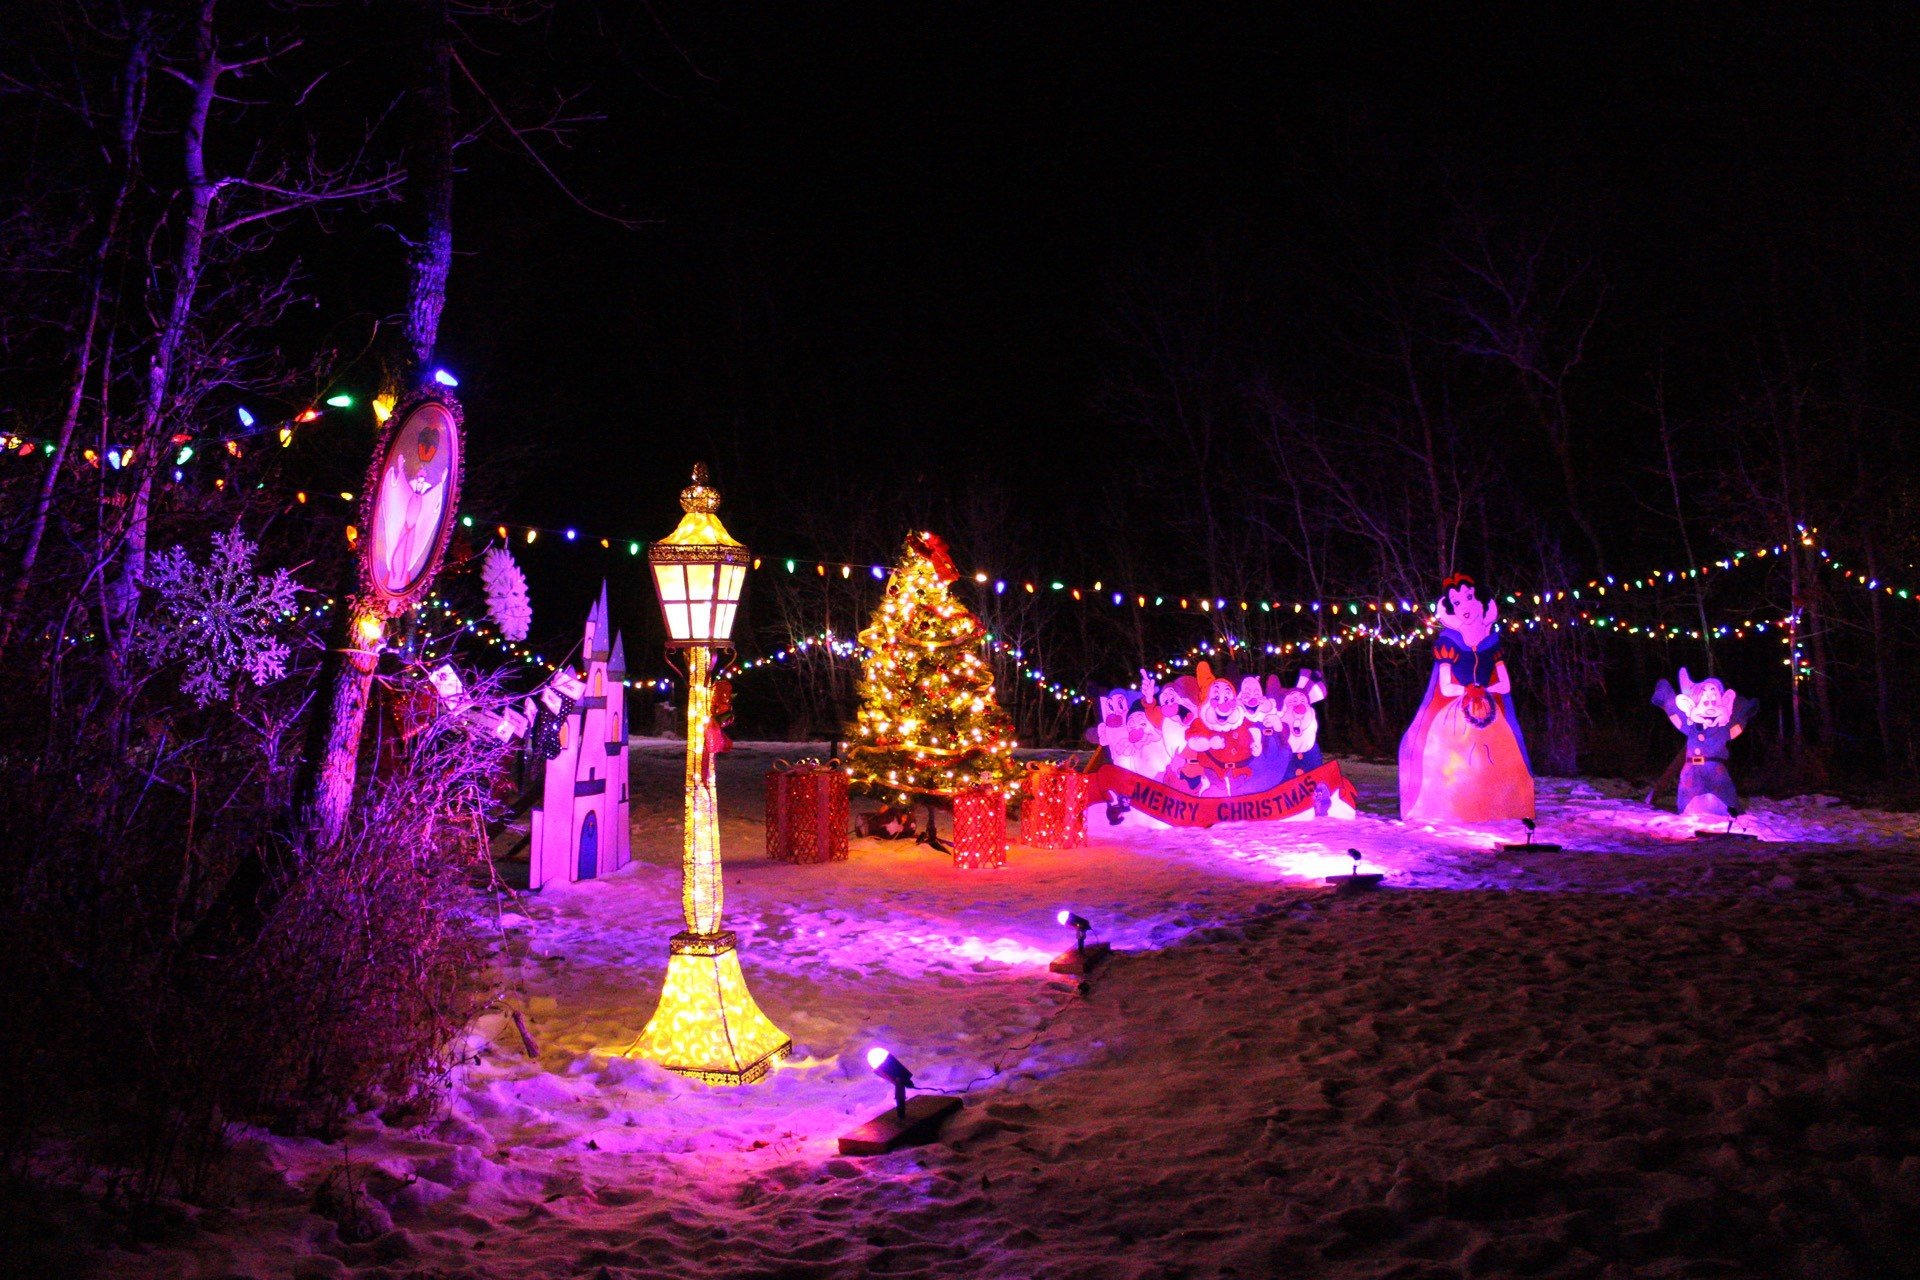 The Pike Lake Festival of Lights